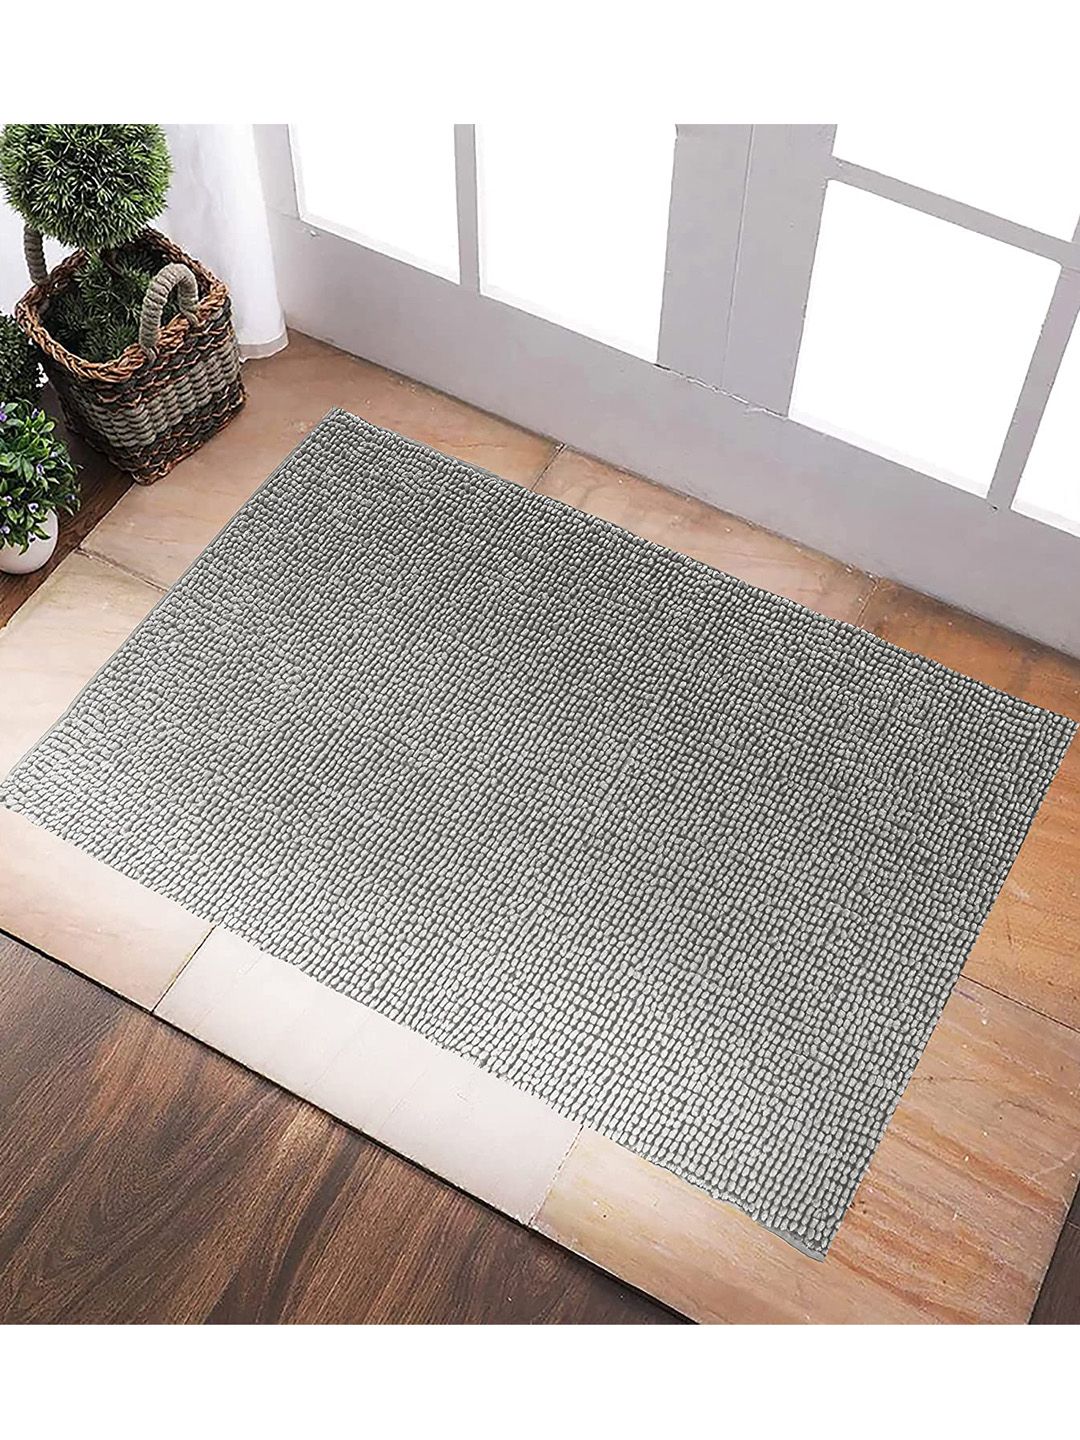 Homitecture Light-Grey Solid 1400 GSM Anti-Skid Bath Rug Price in India